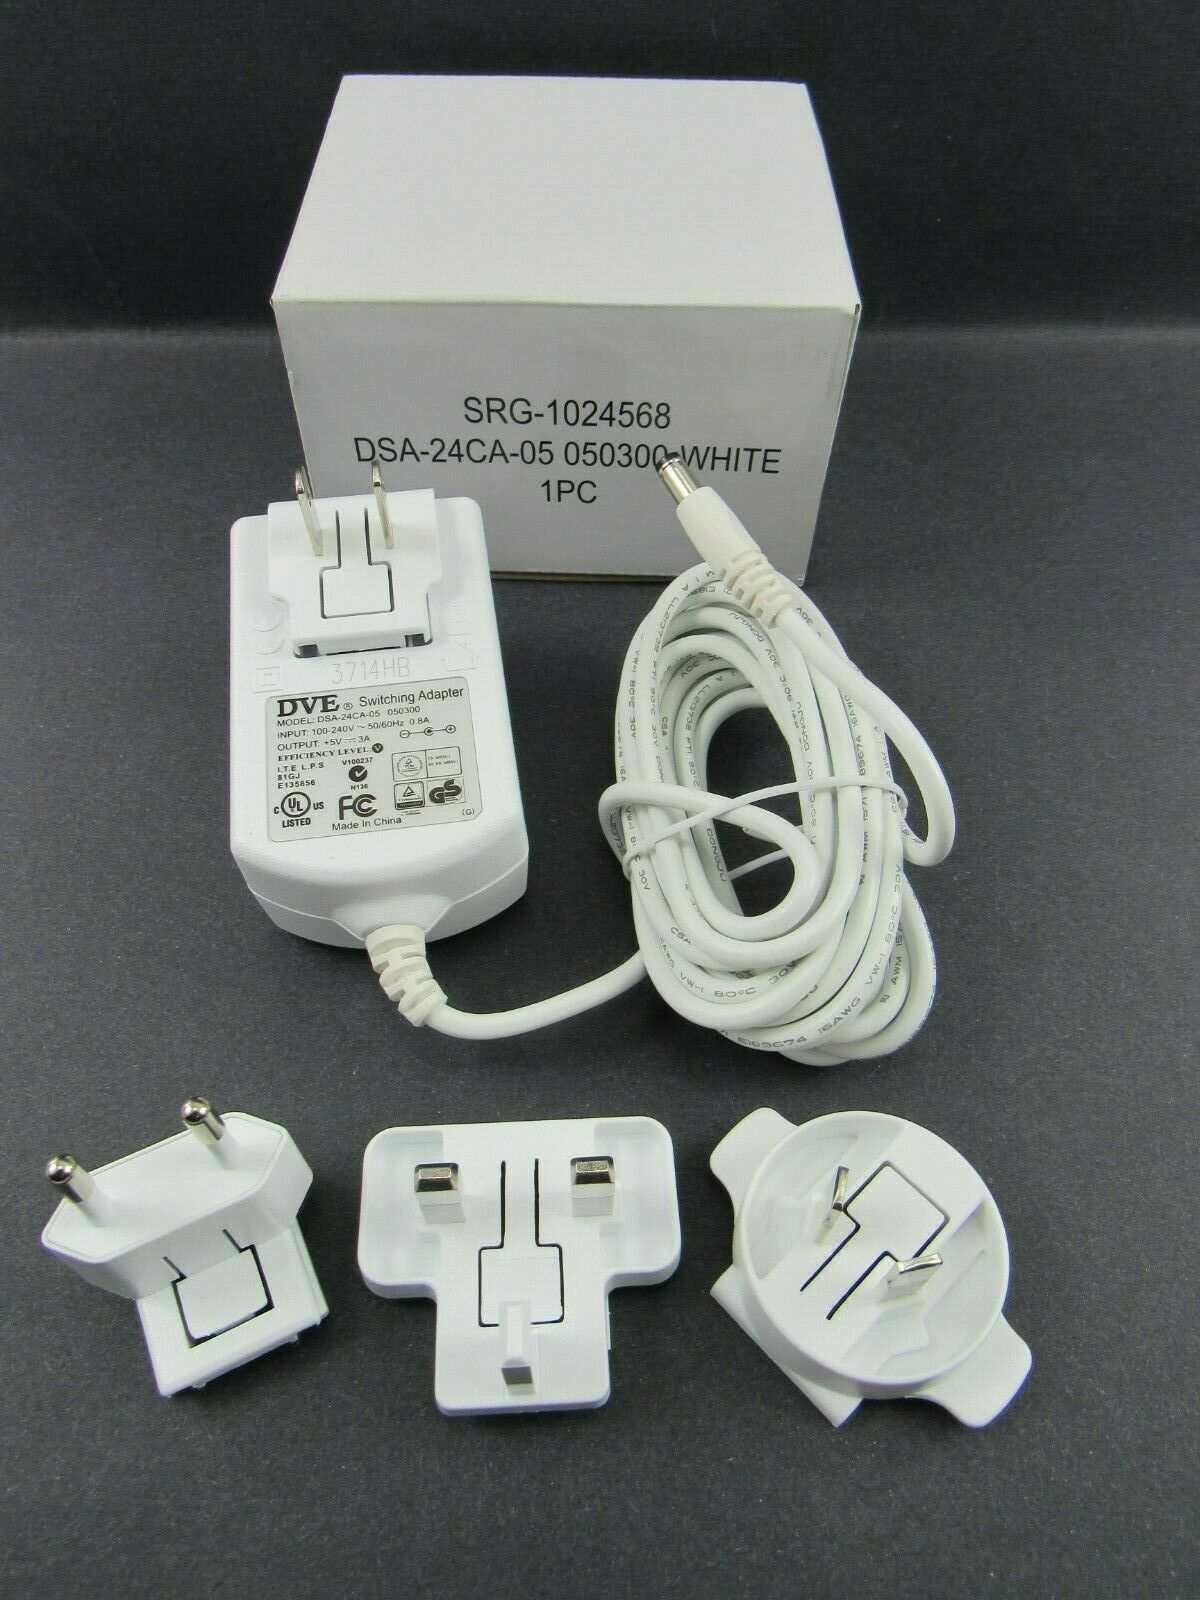 DVE Switching Adapter Model DSA-24CA-05 050300 5V 3A Power AC Adapter Charger Country/Region of Man